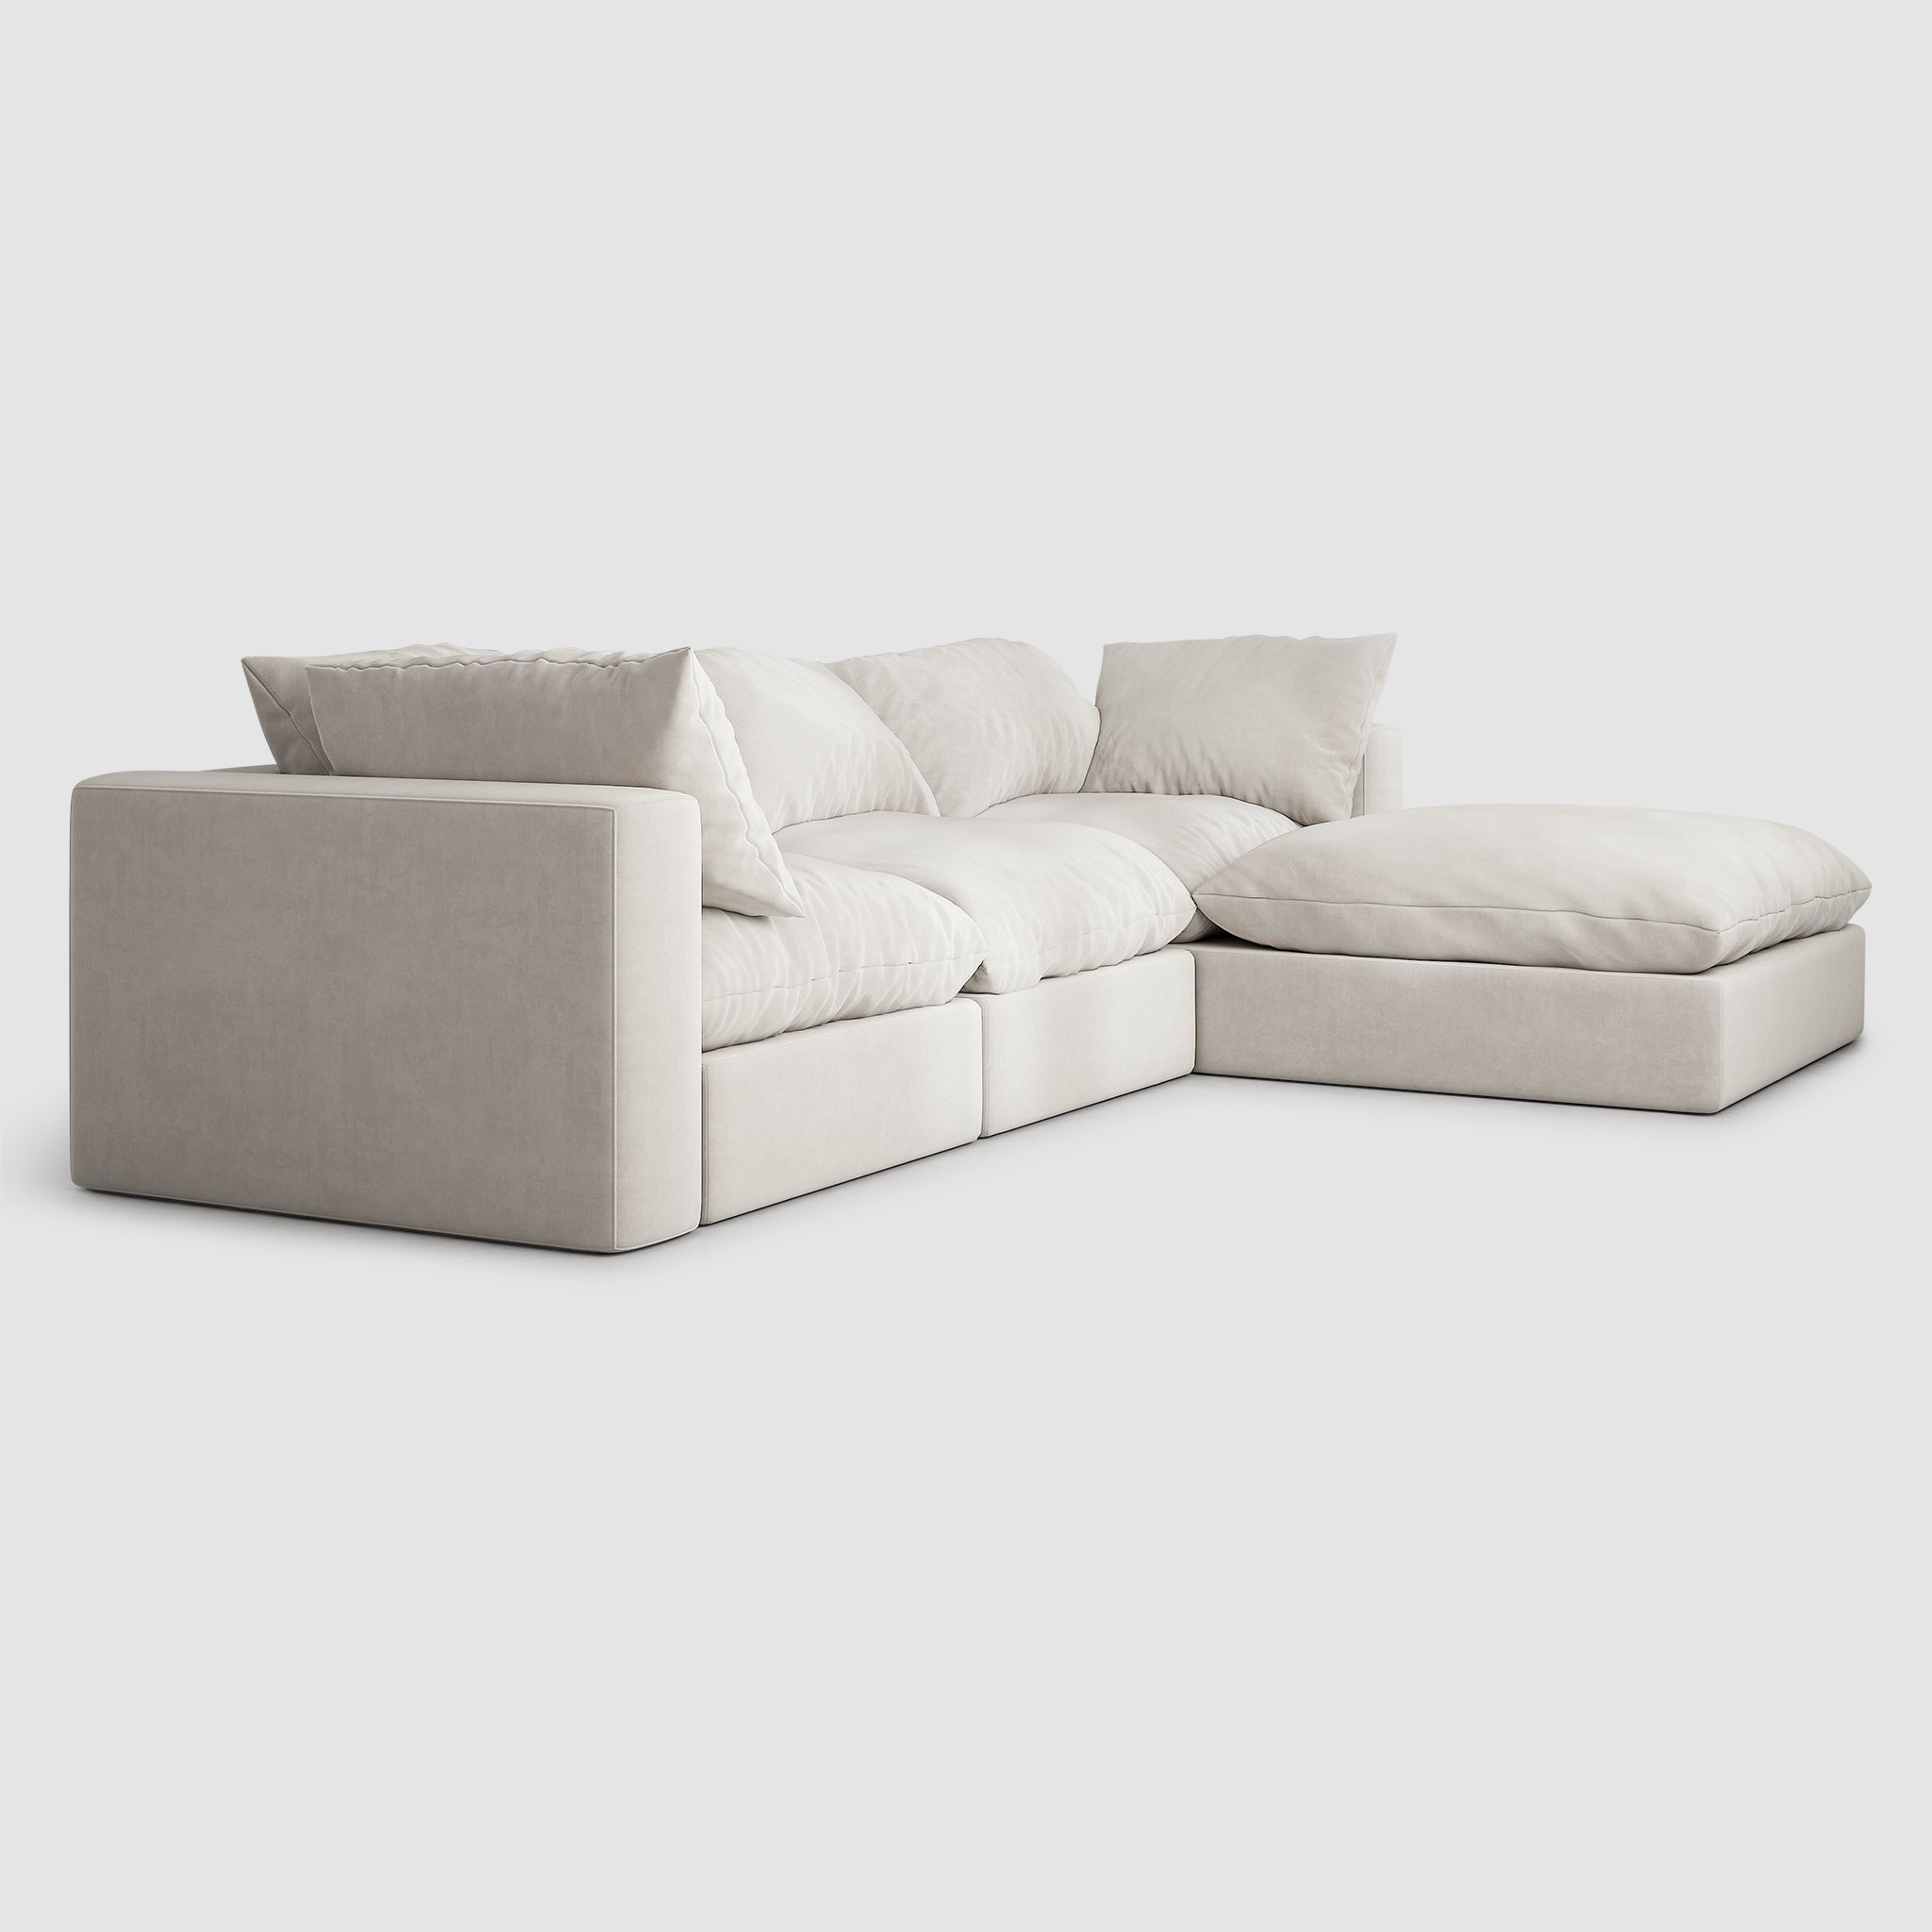 White sectional couch with detachable ottoman in a modern living room. The couch has a solid wood frame and is upholstered in white fabric. The removable cushions are filled with a premium blend of foam and feathers, providing unparalleled softness and support.